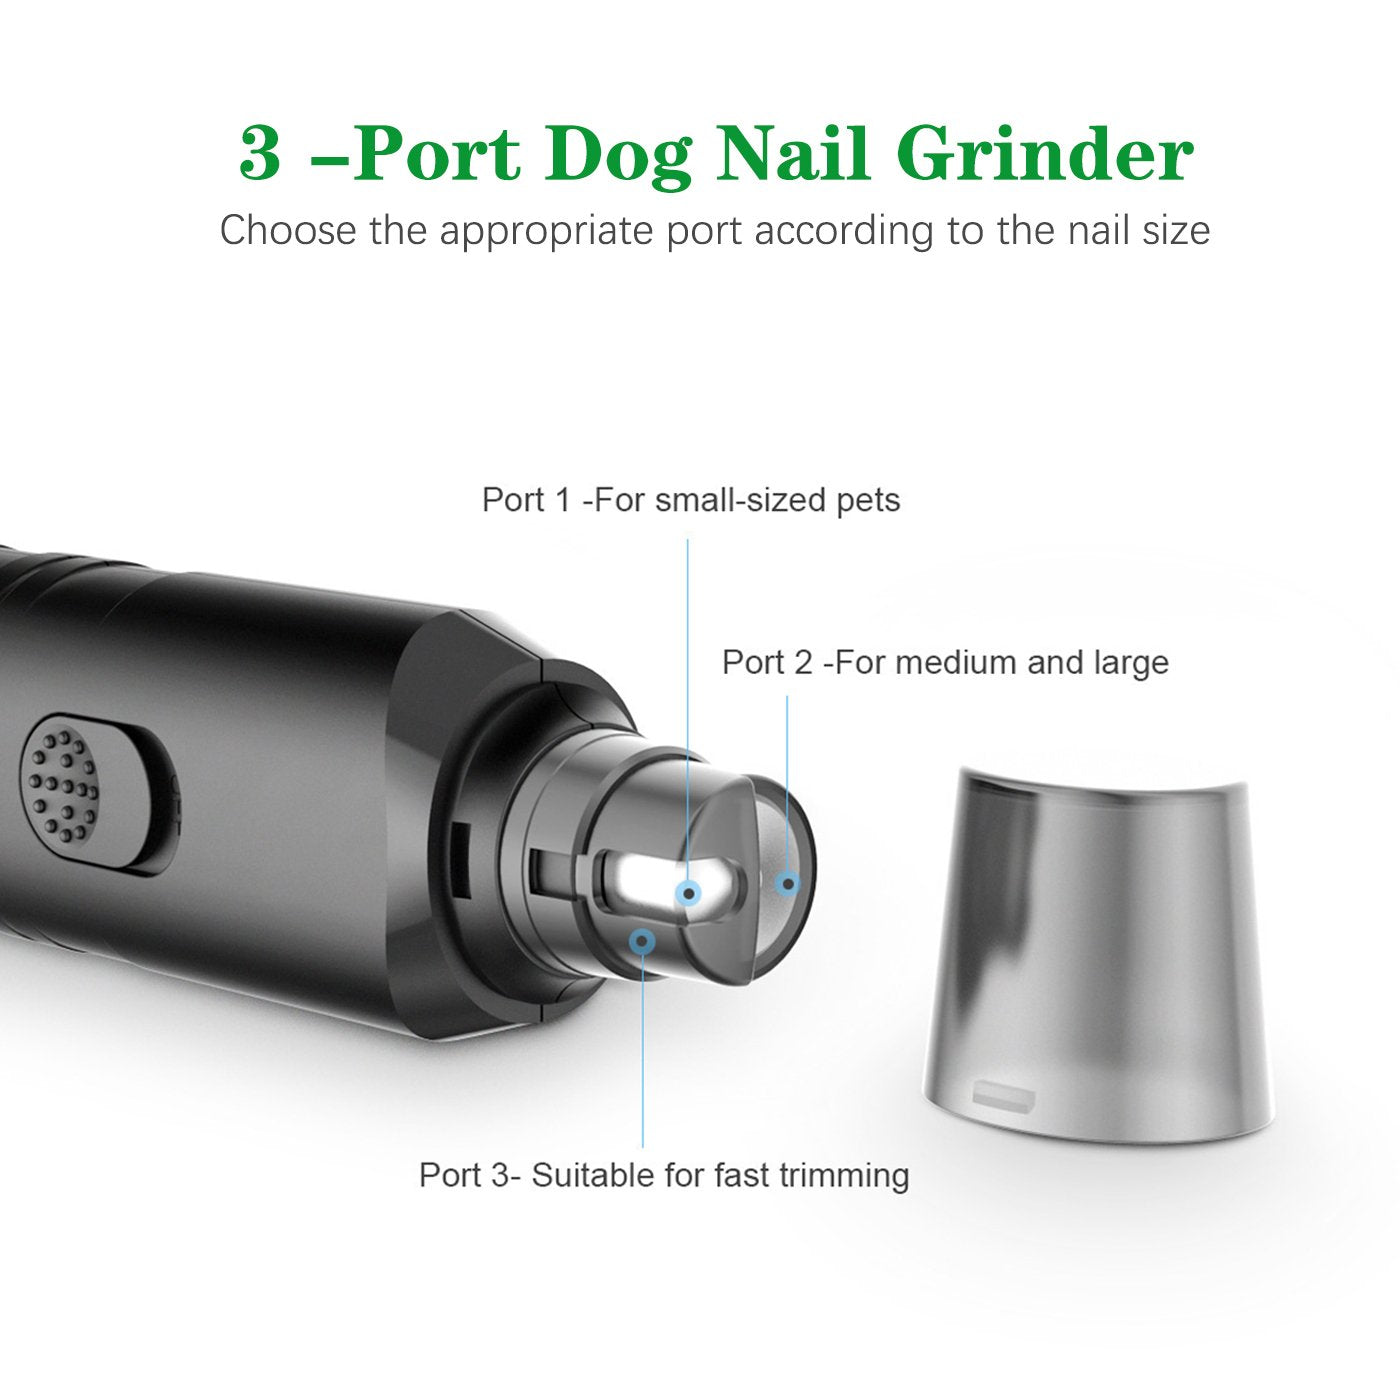 Buy Pet Nail Grinder At Best Prices | Upto 50% OFF - HANK